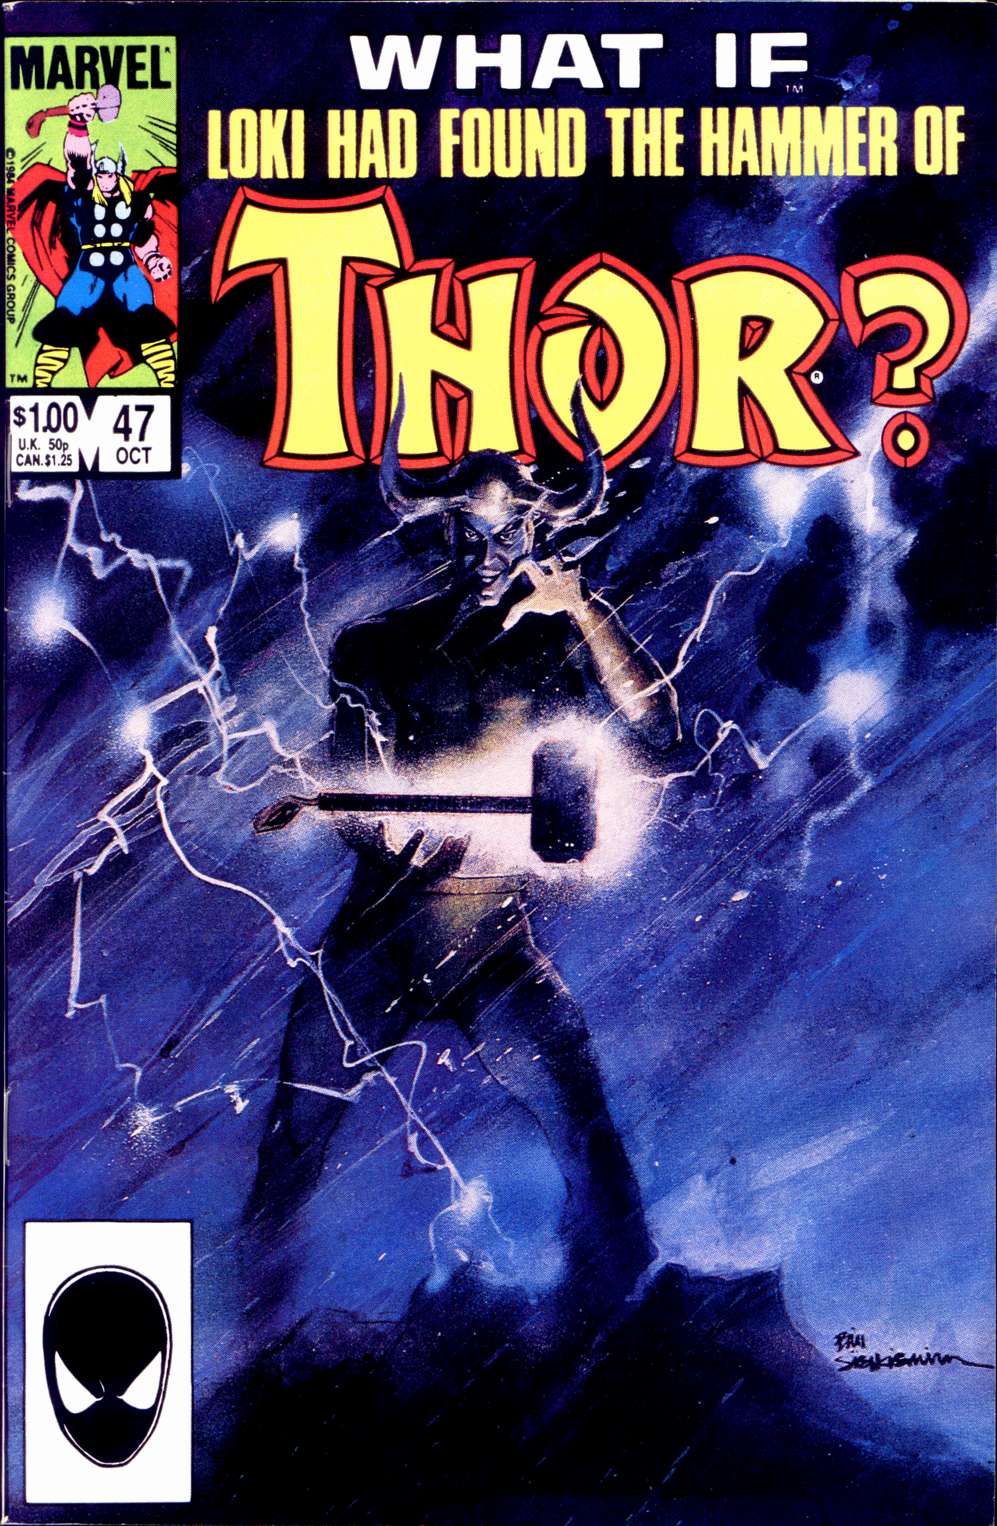 What If? (1977) issue 47 - Loki had found The hammer of Thor - Page 1